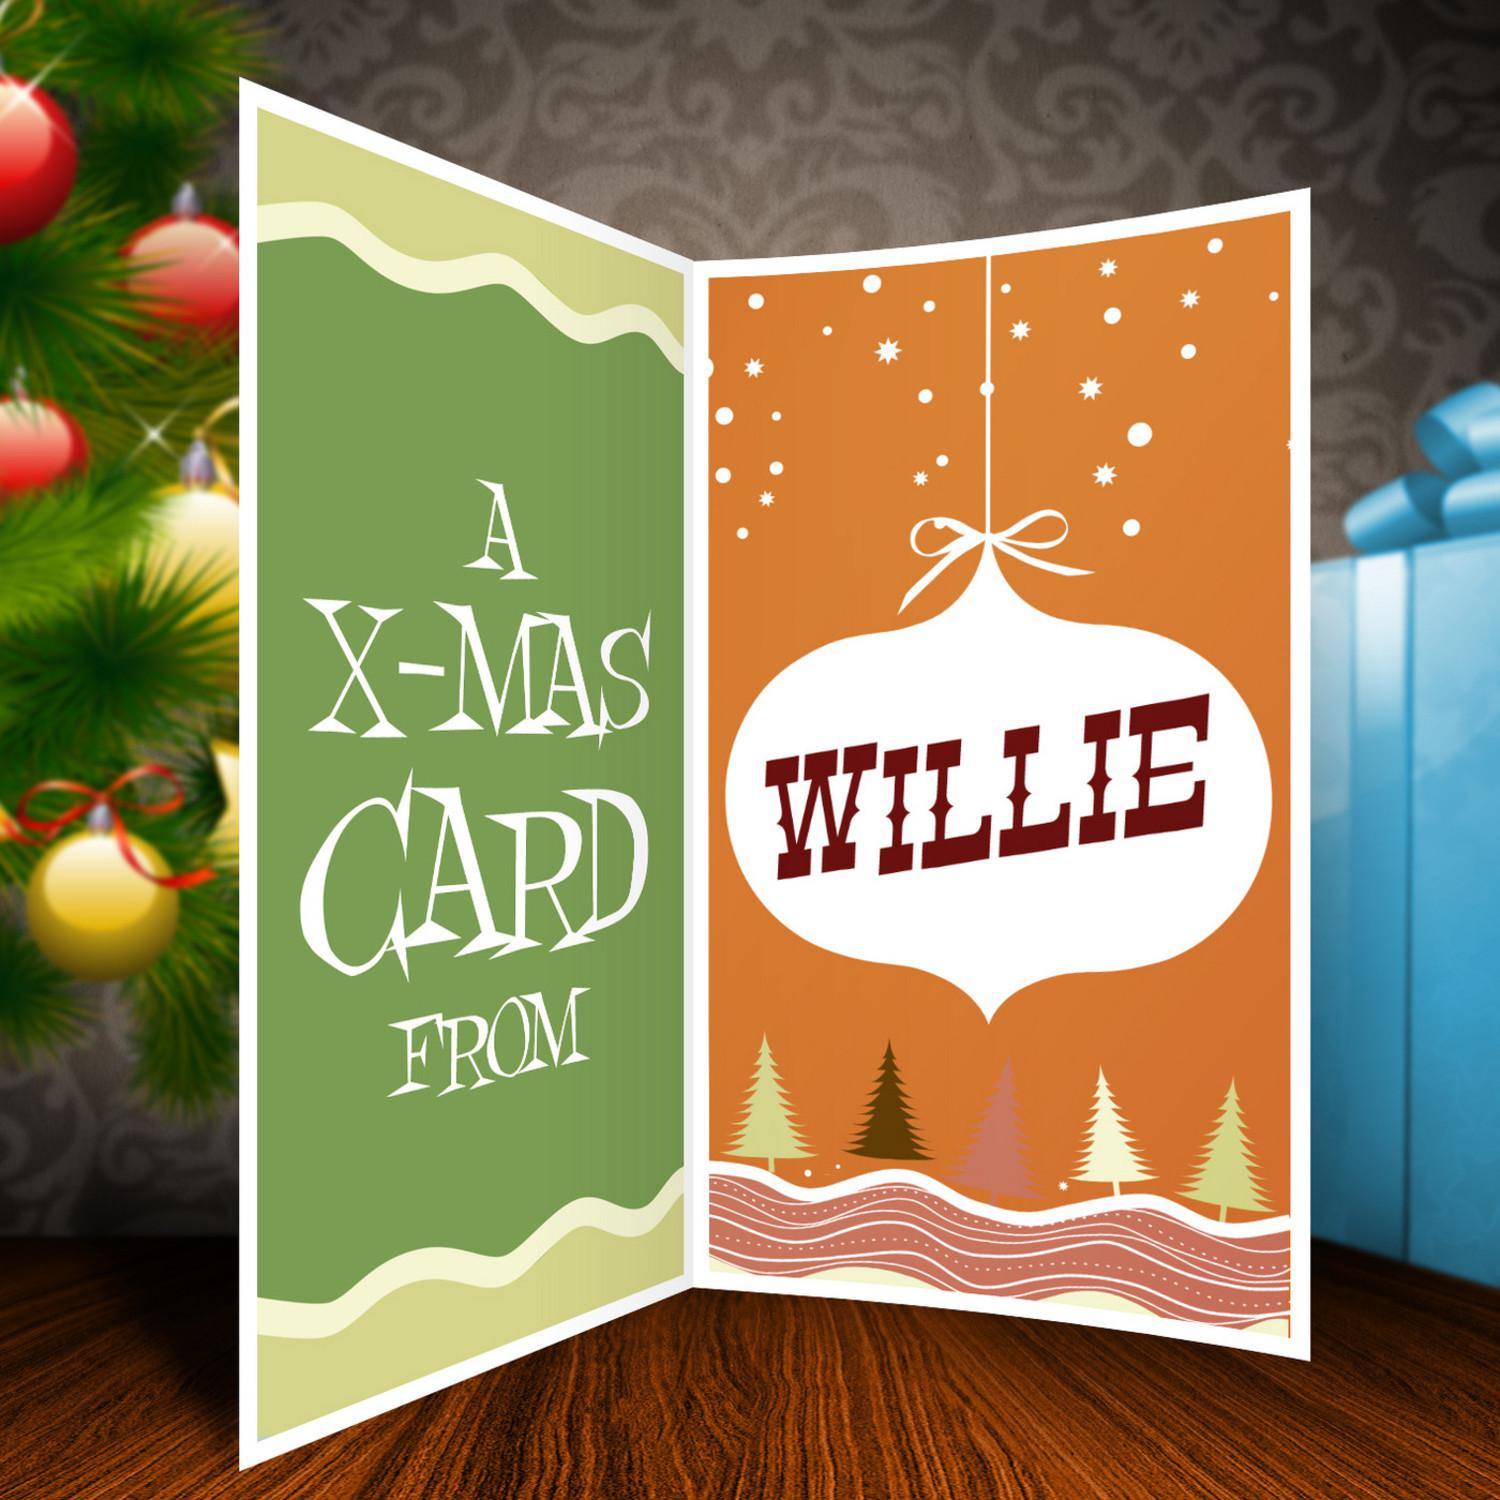 A Christmas Card From Willie专辑